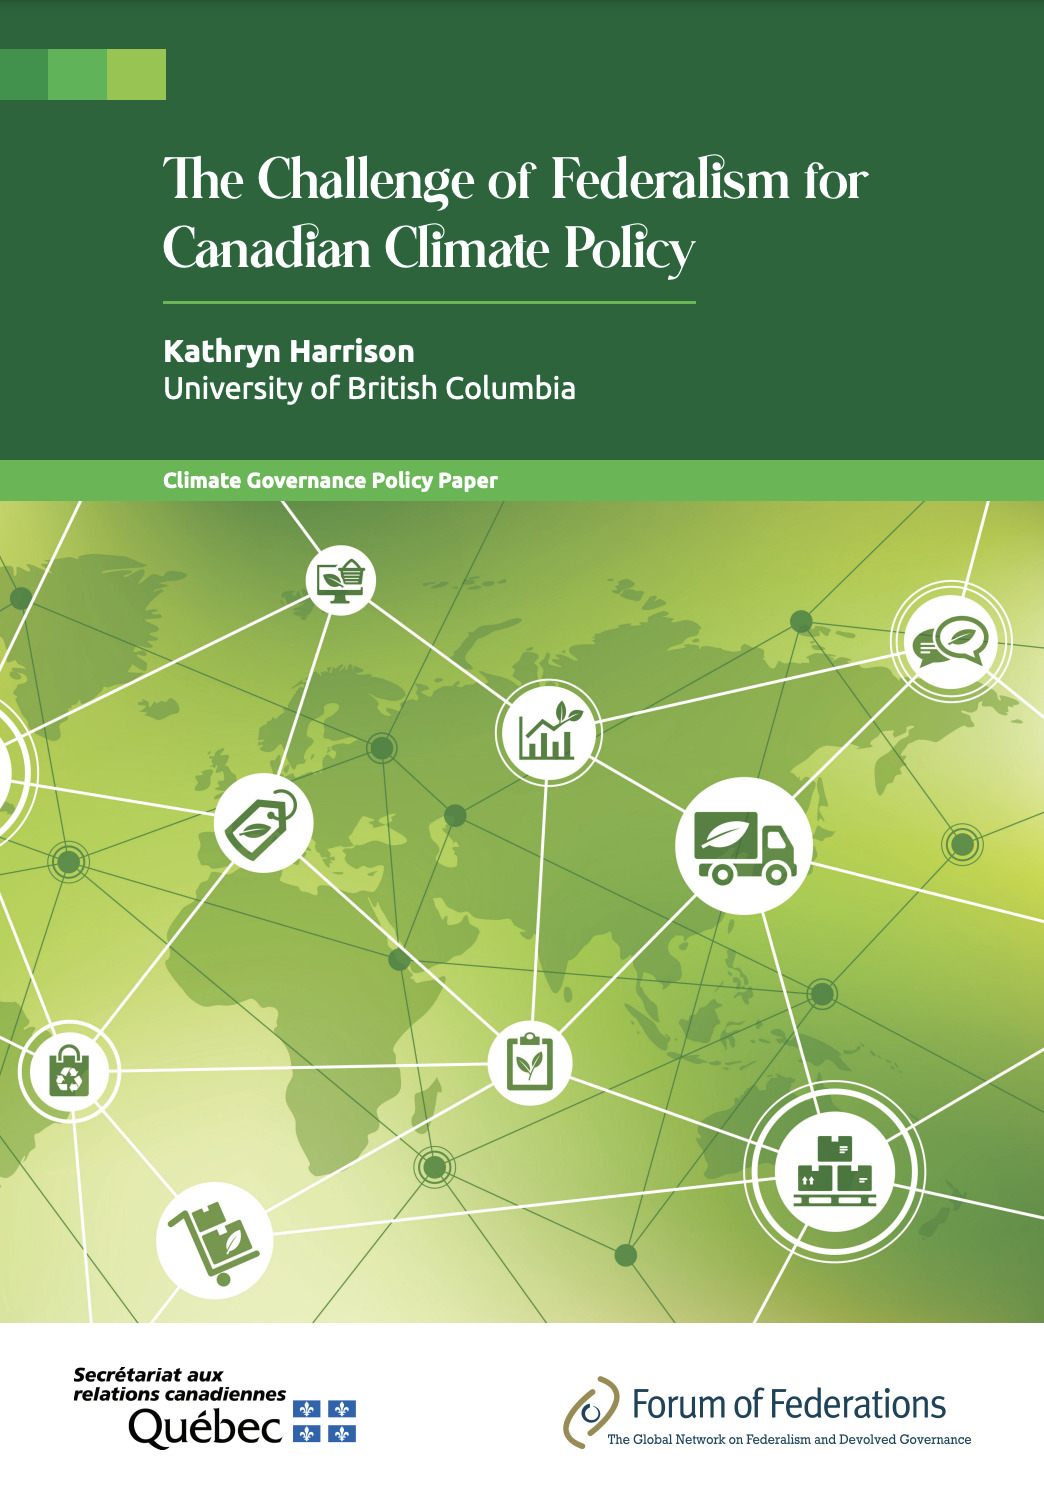 The Challenge of Federalism for Canadian Climate Policy